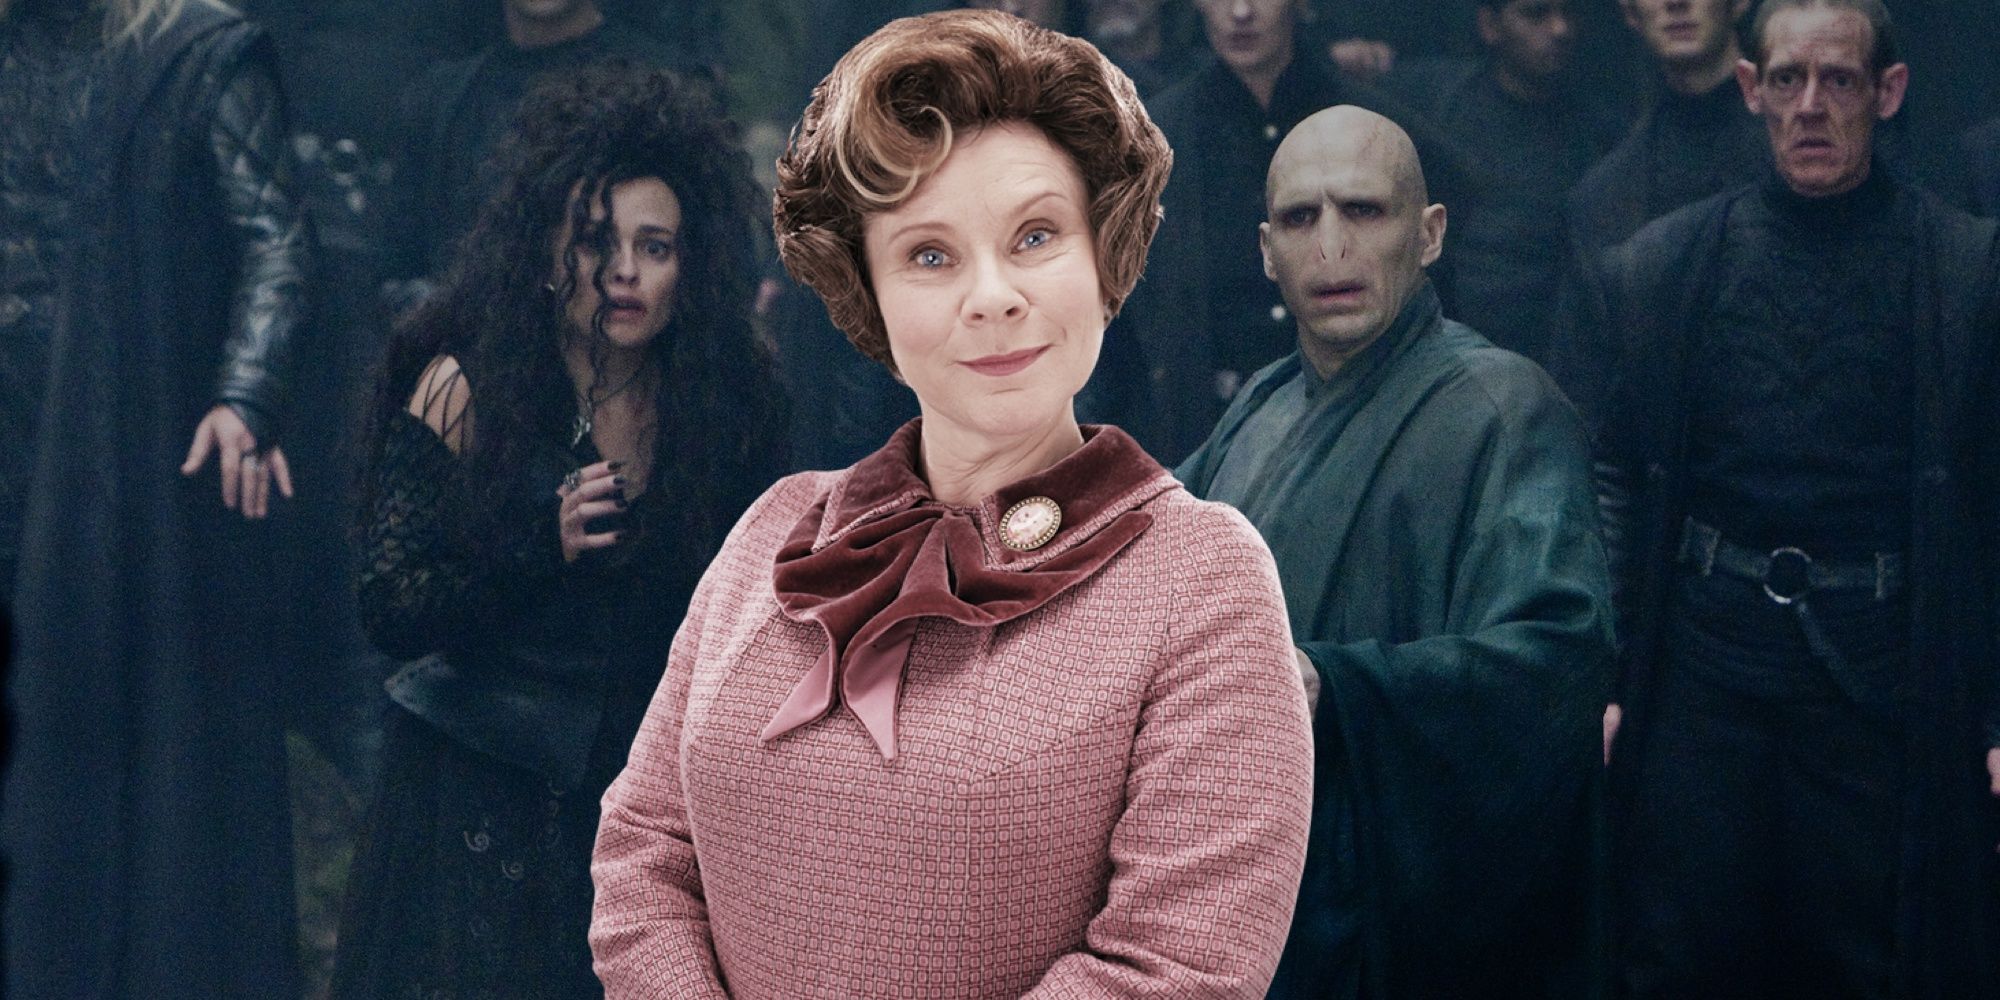 An image of Dolores Umbridge standing in front of the Death Eaters in Harry Potter